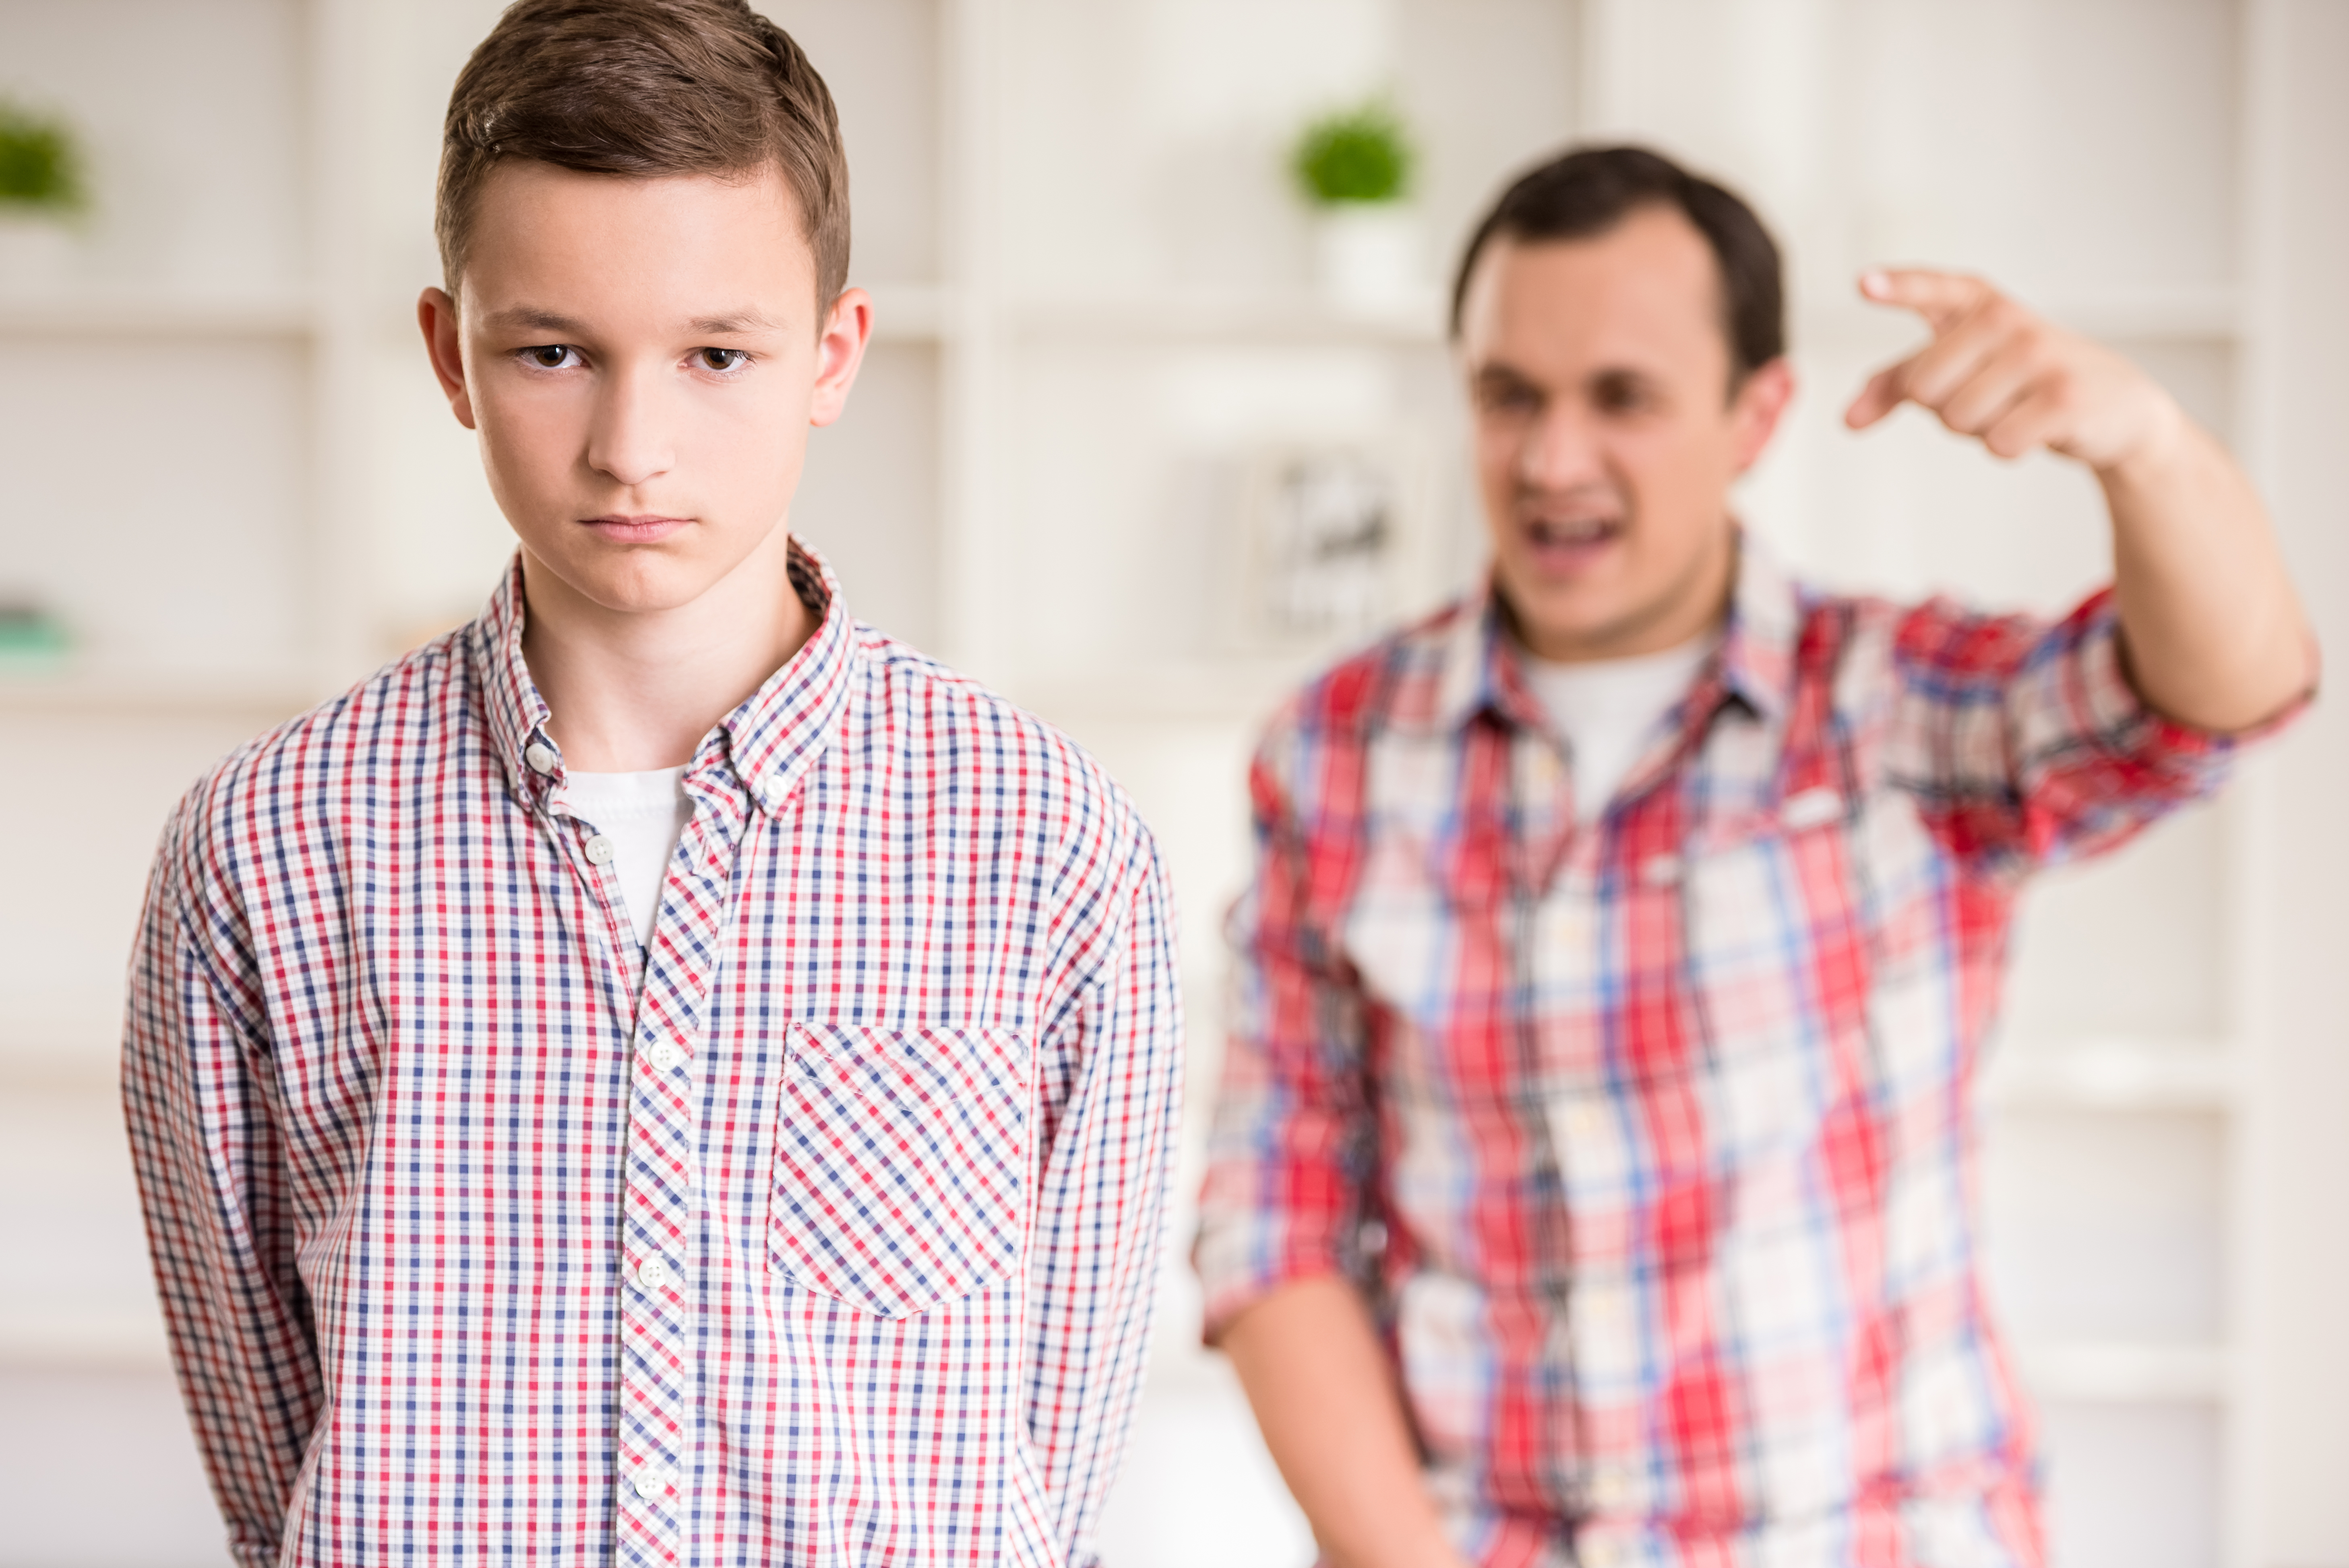 A young boy being scolded by his father | Source: Shutterstock